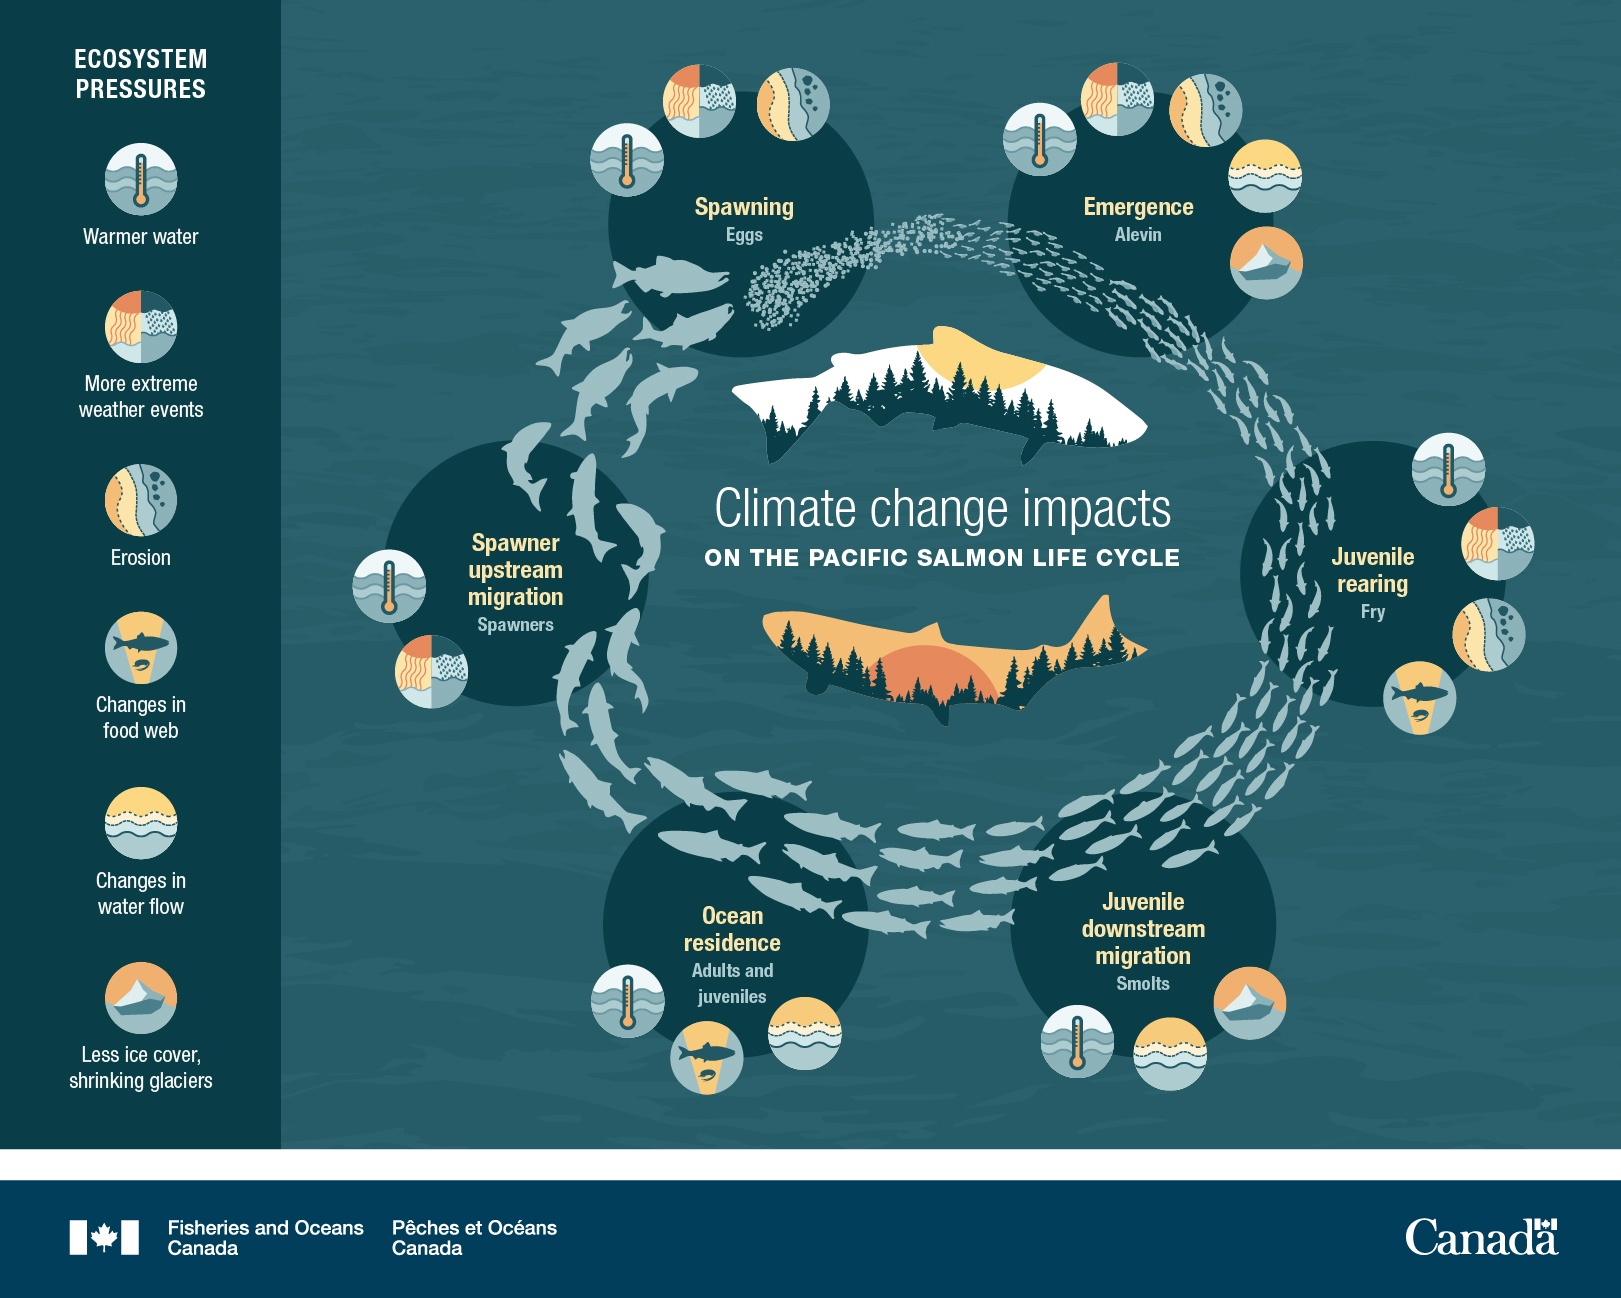 Canada’s Oceans Now, Pacific Ecosystems 2021 - Climate change impacts on the Pacific salmon life cycle